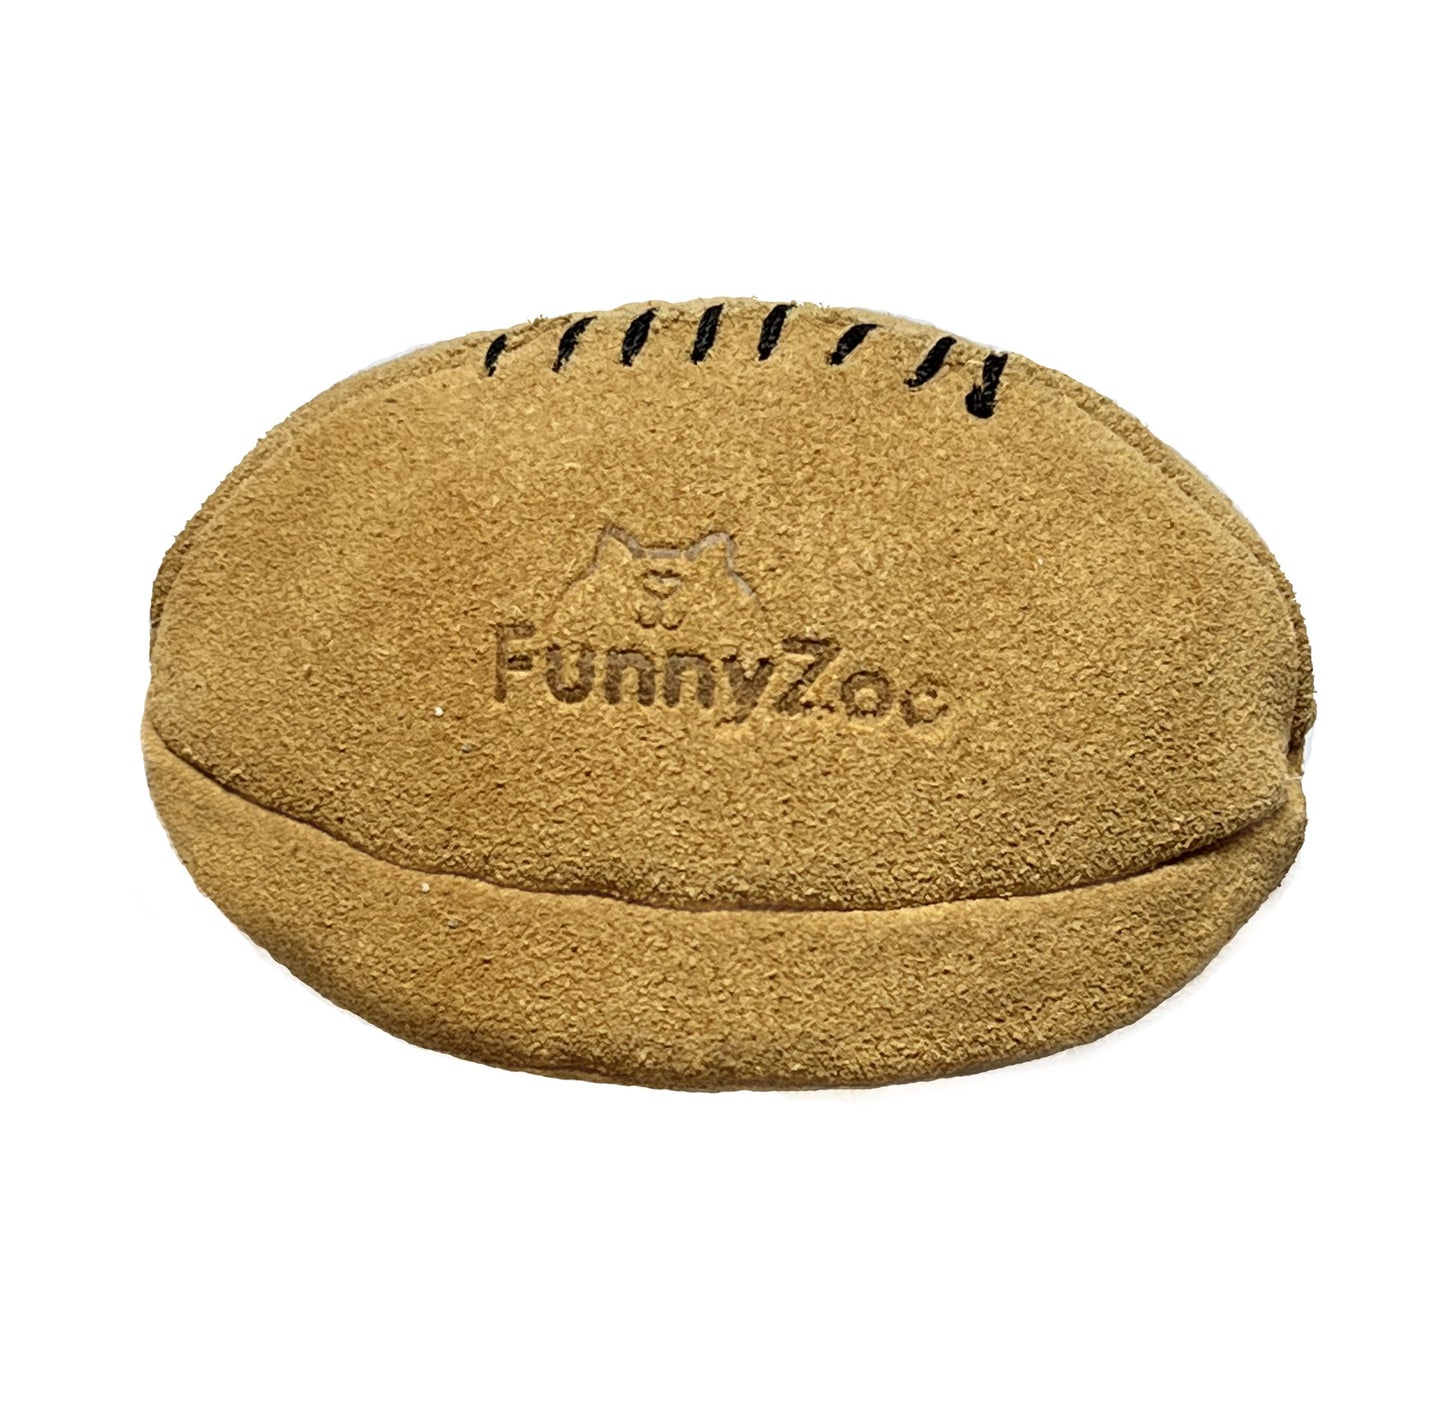 Funny Zoo - COCCO BALL natural toy for dogs - Happy Hounds Pet Supply